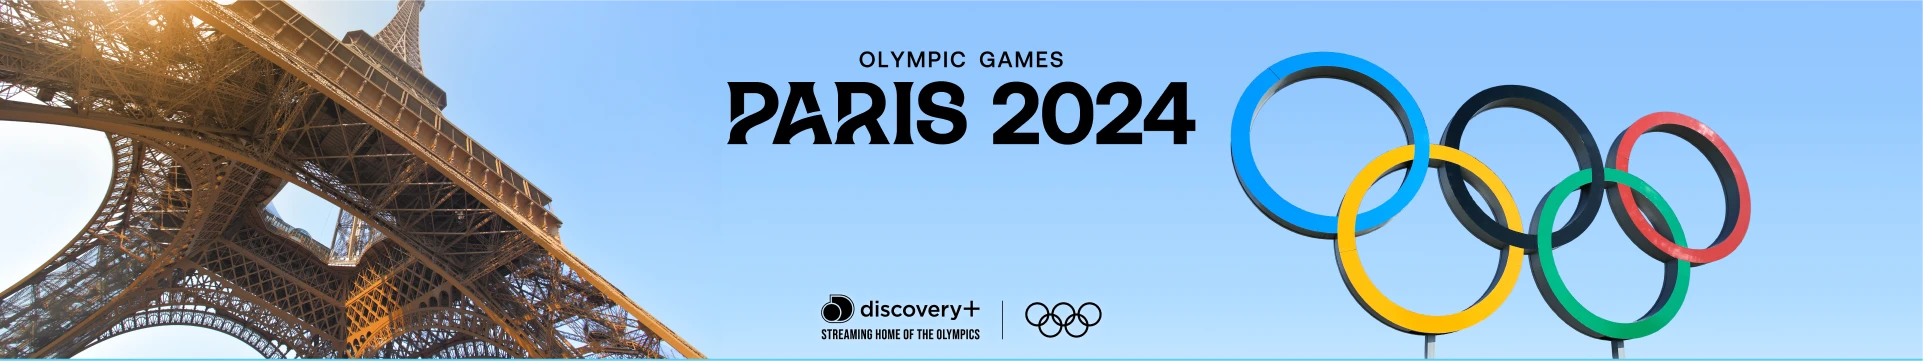 Olympic games Paris 2024 - discovery+ streaming home of the Olympics